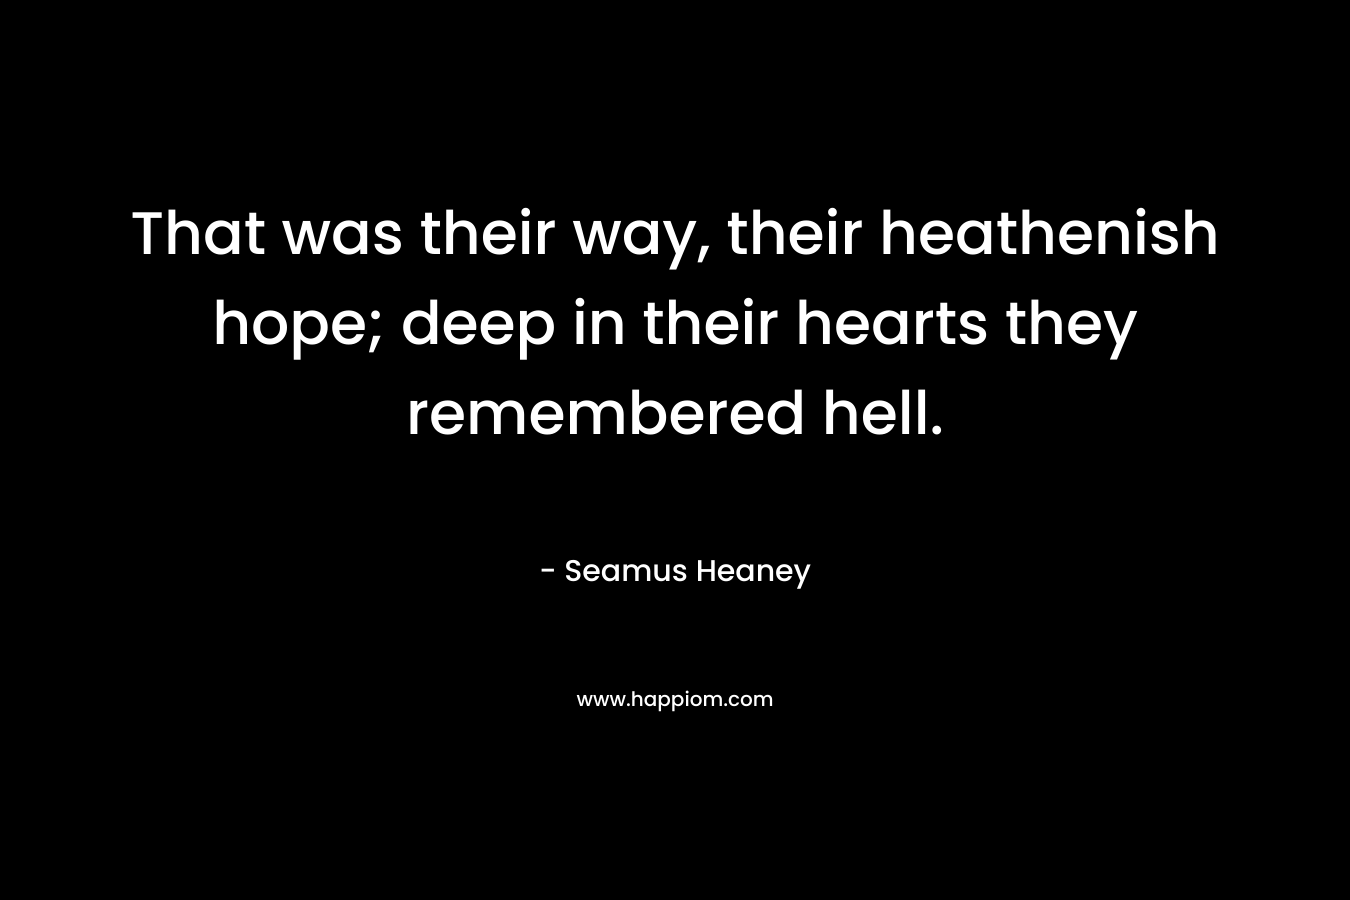 That was their way, their heathenish hope; deep in their hearts they remembered hell. – Seamus Heaney